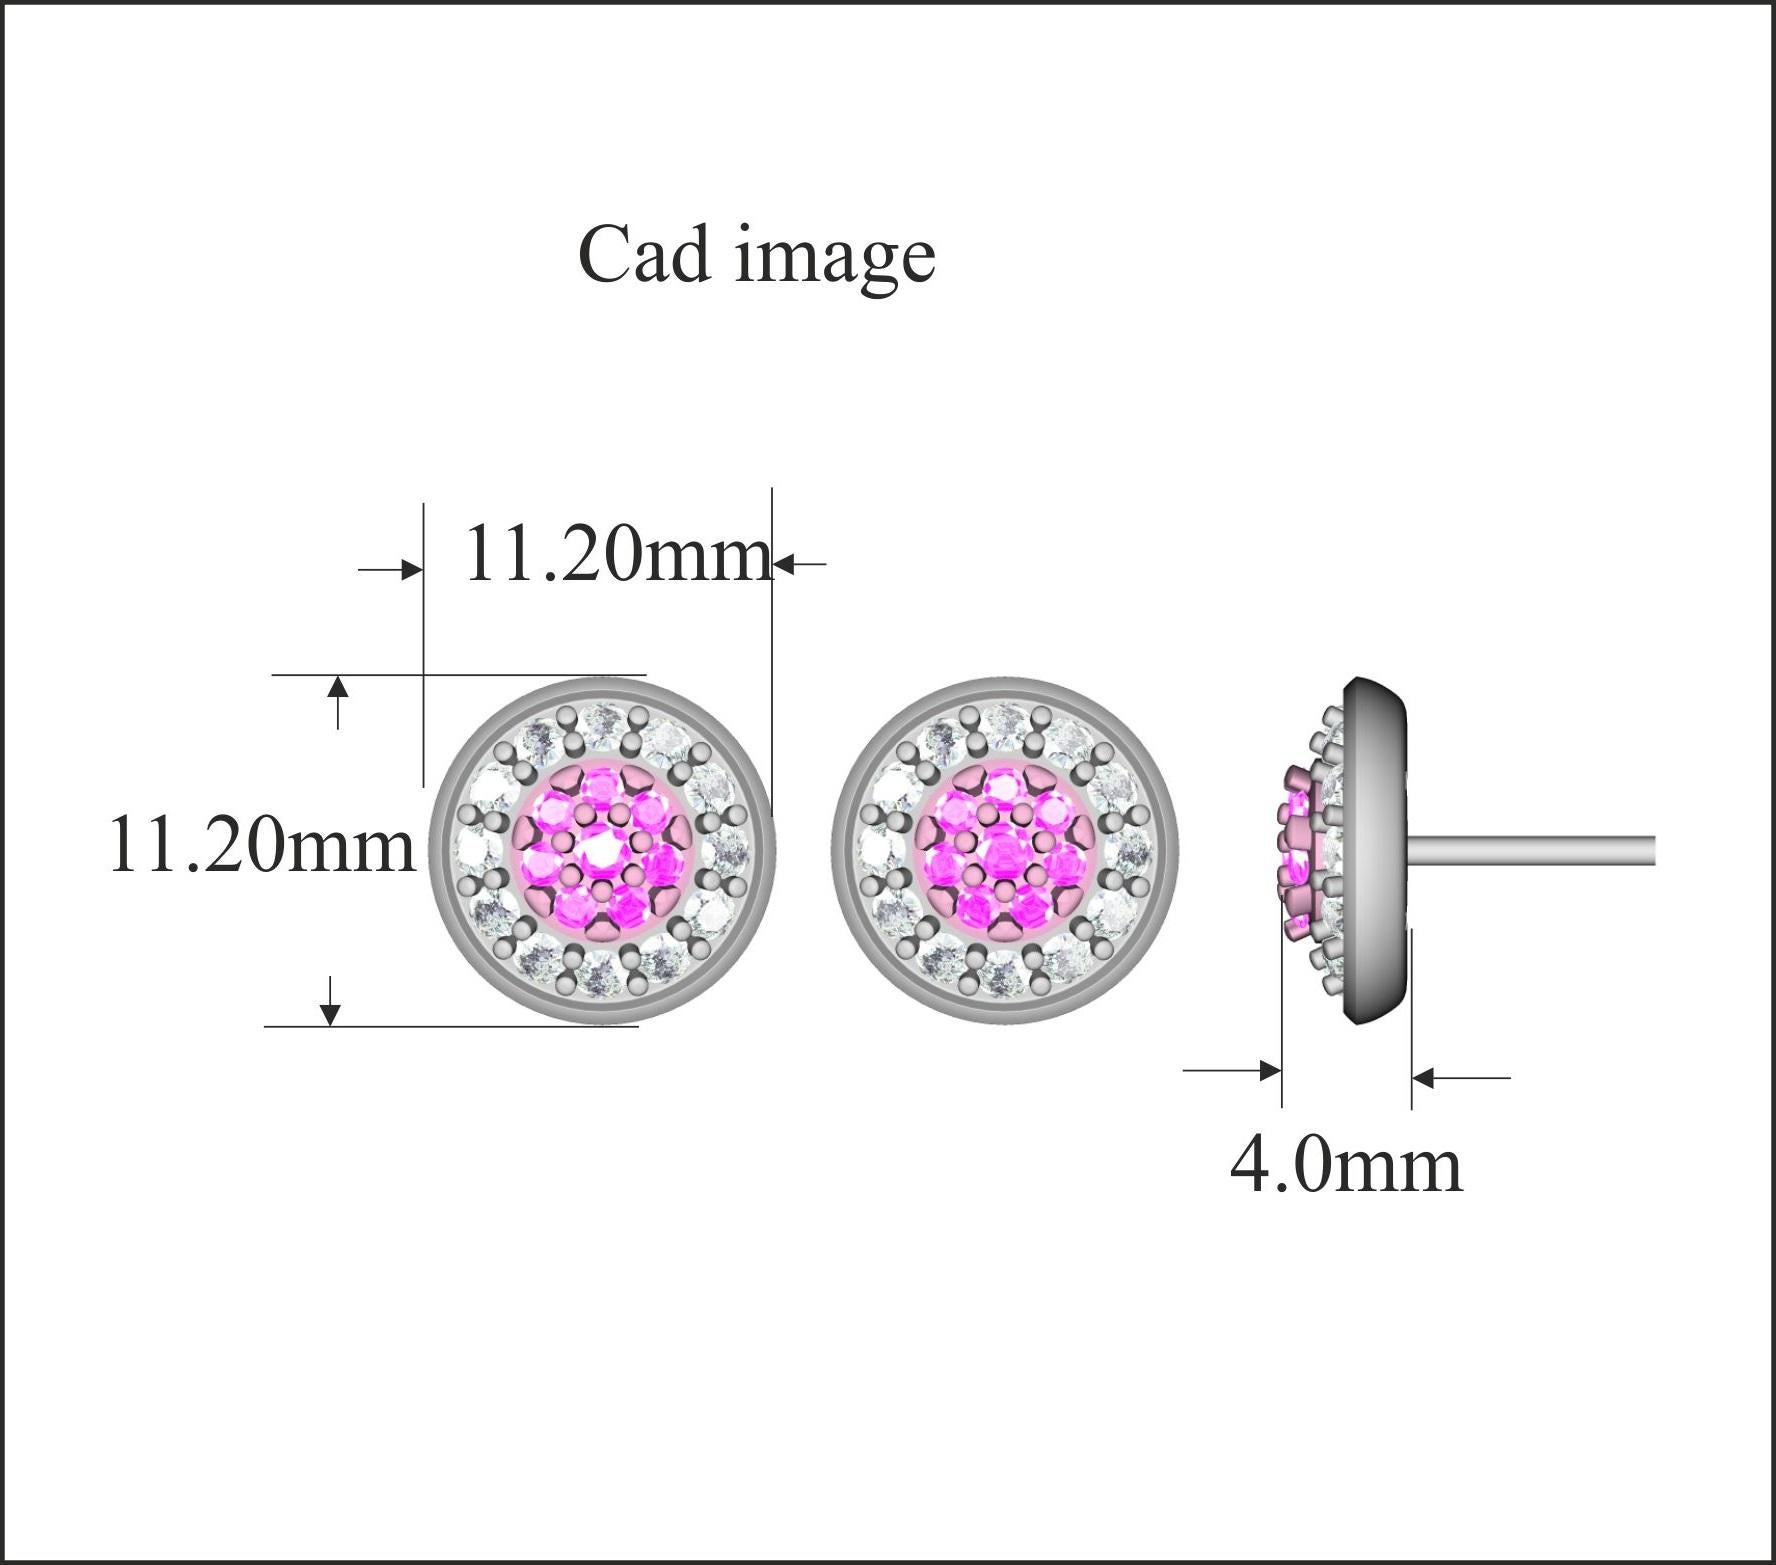 18 Karat Twotoned Gold cluster diamond Stud Earrings With 24 white and 16 Pink Diamonds timeless Cluster design Stud earrings have 1.00 Carats of Round white and pink diamond set in pave and prong setting, H-I color I2 clarity. These sparkling